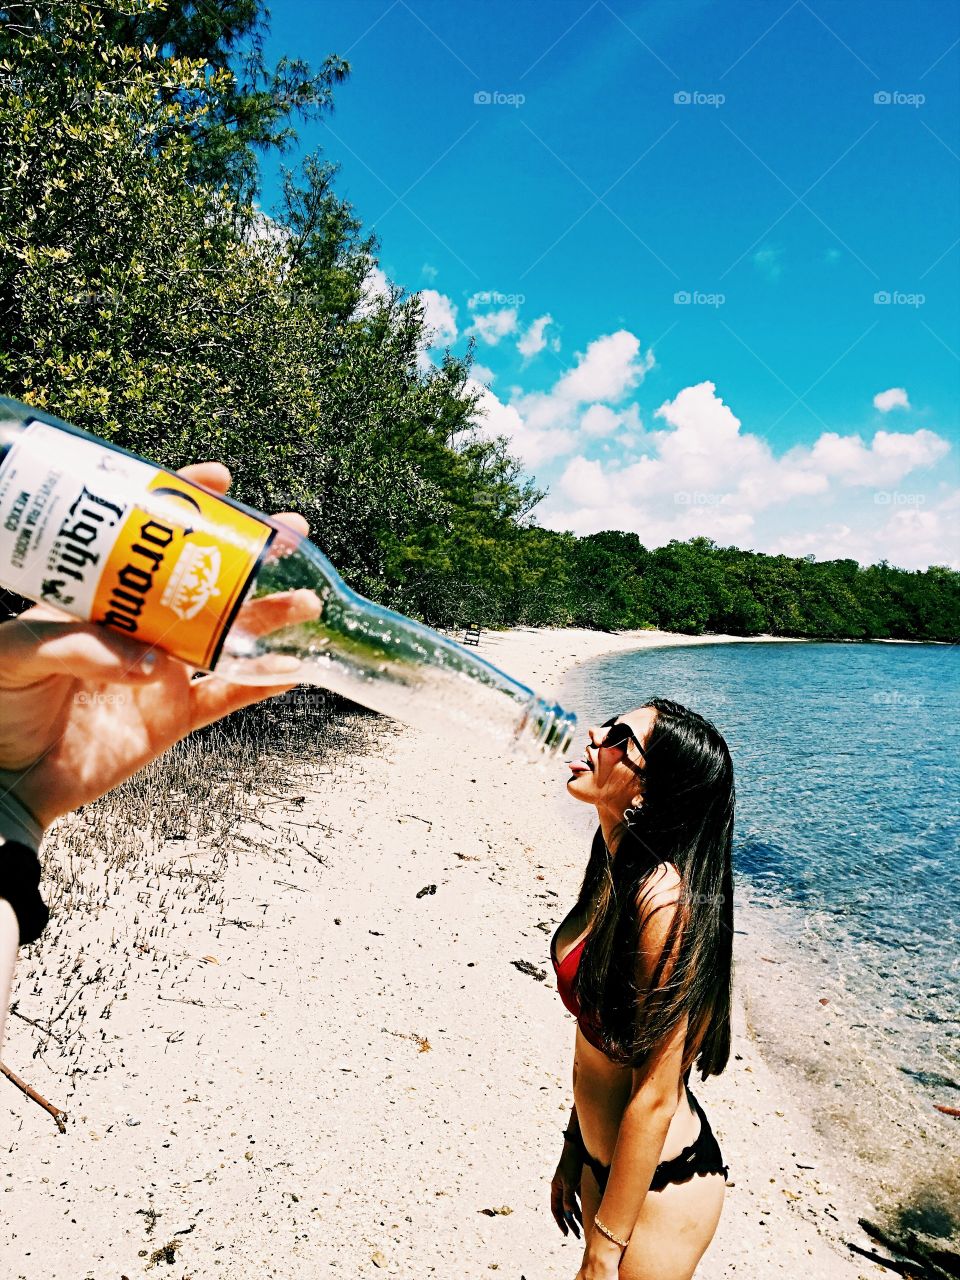 Woman drinking beer from bottle at sea side